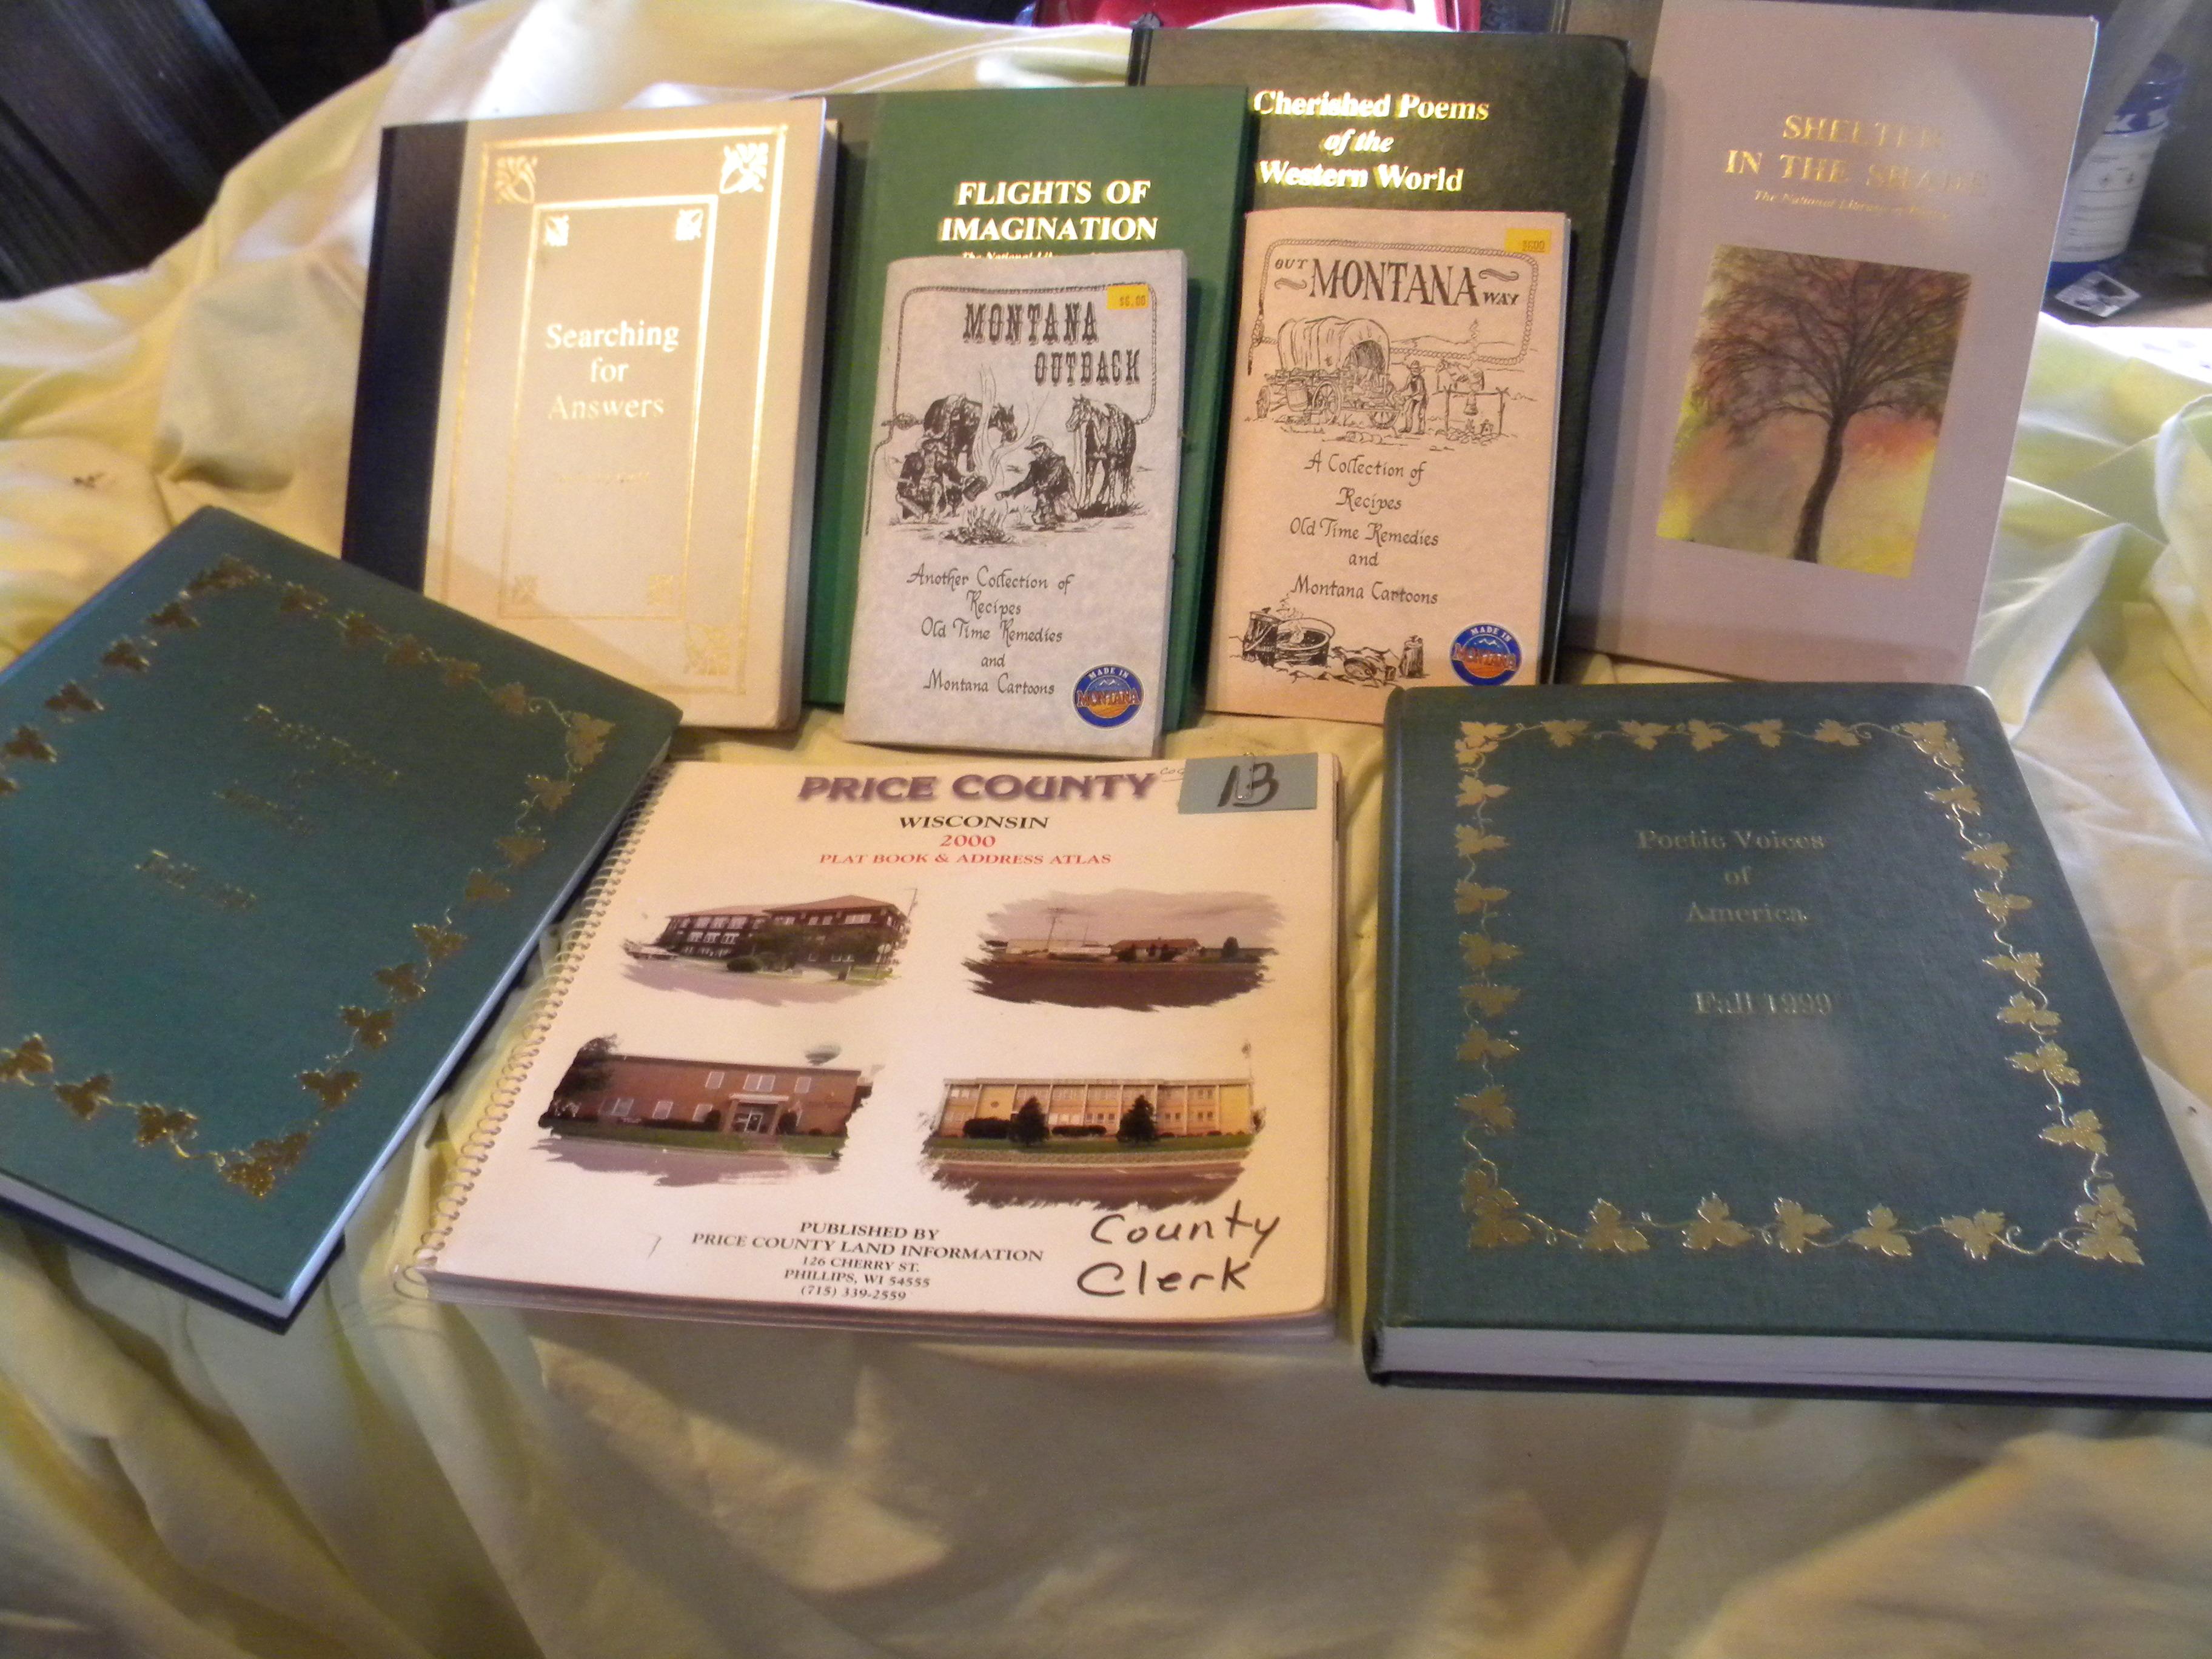 Price County Wisc. 2002 Plat Book; (6) Petry Books Of "cherished Poems Of